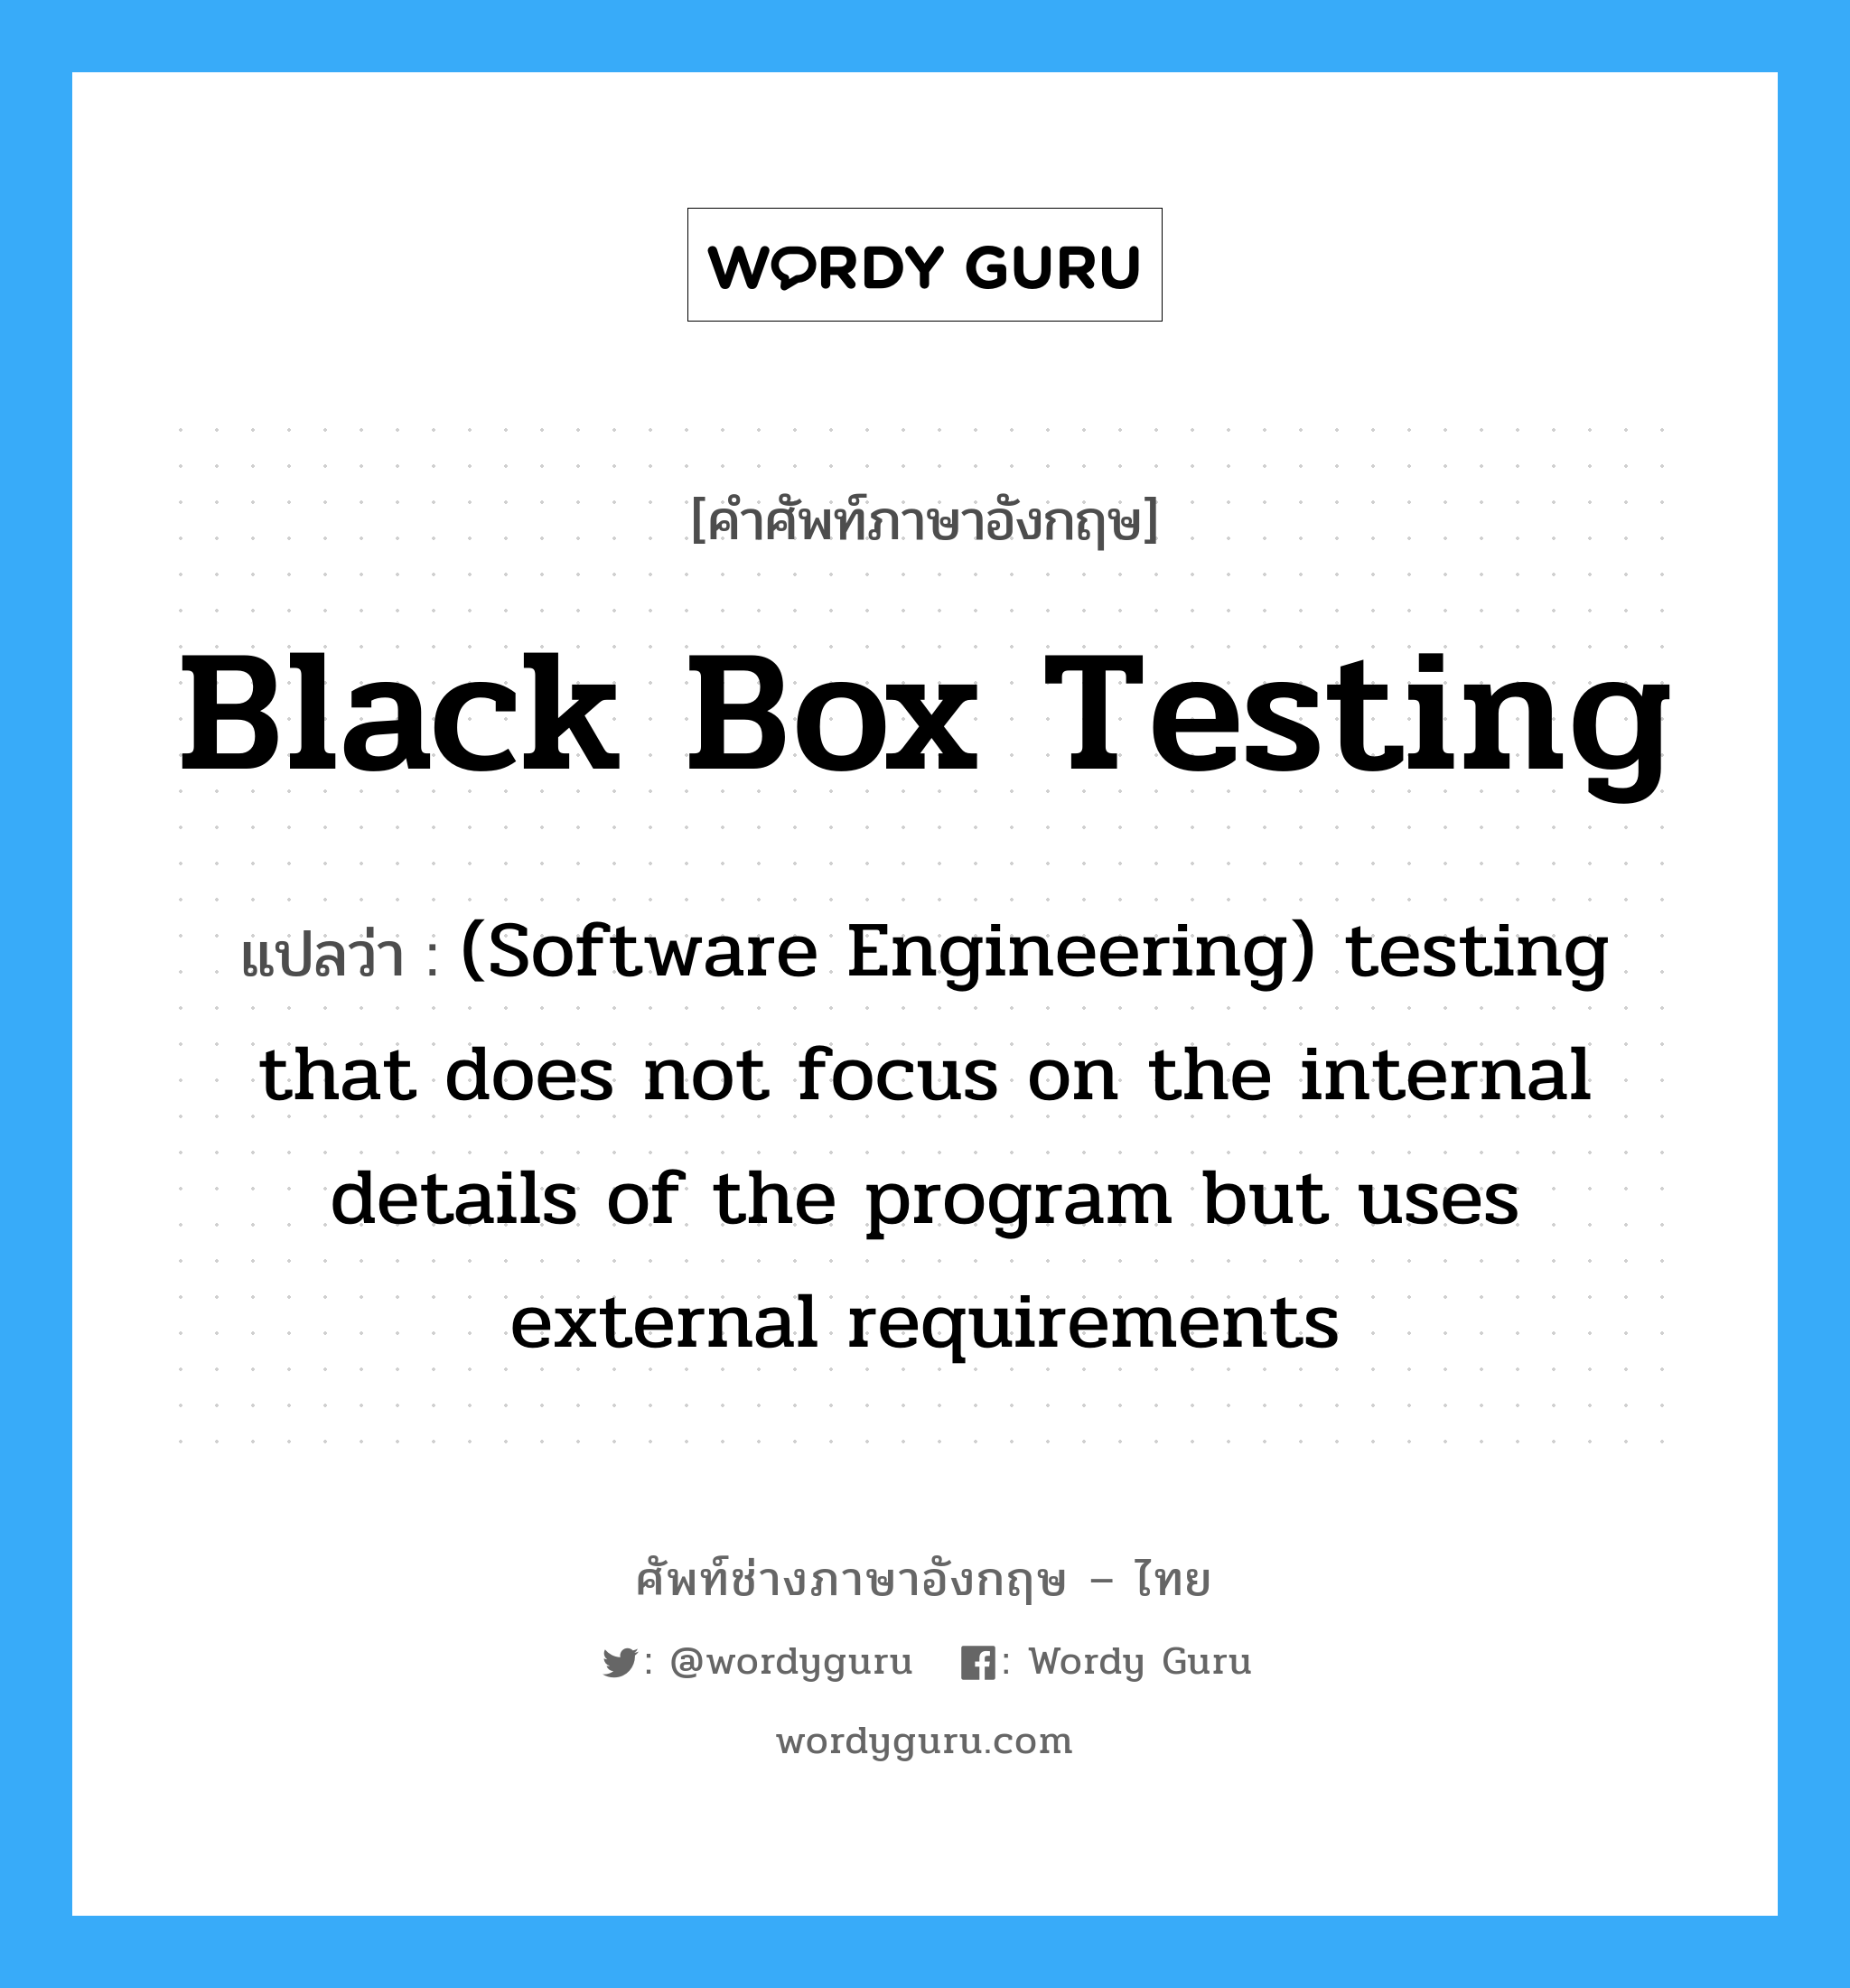 Black box testing แปลว่า?, คำศัพท์ช่างภาษาอังกฤษ - ไทย Black box testing คำศัพท์ภาษาอังกฤษ Black box testing แปลว่า (Software Engineering) testing that does not focus on the internal details of the program but uses external requirements